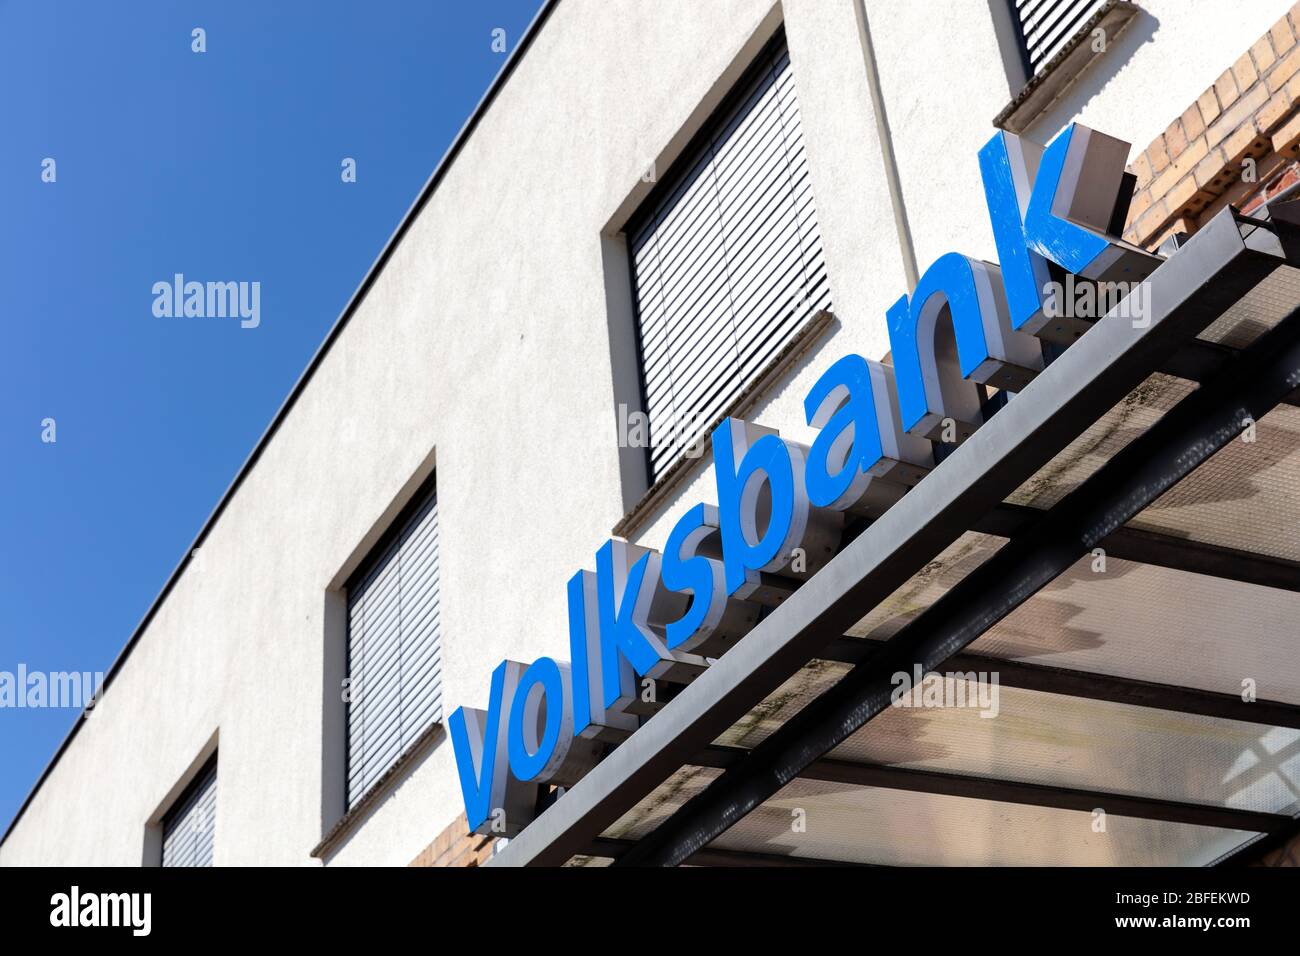 Volksbank branch. Volksbank is a brand of co-operative banks in Germany. Stock Photo